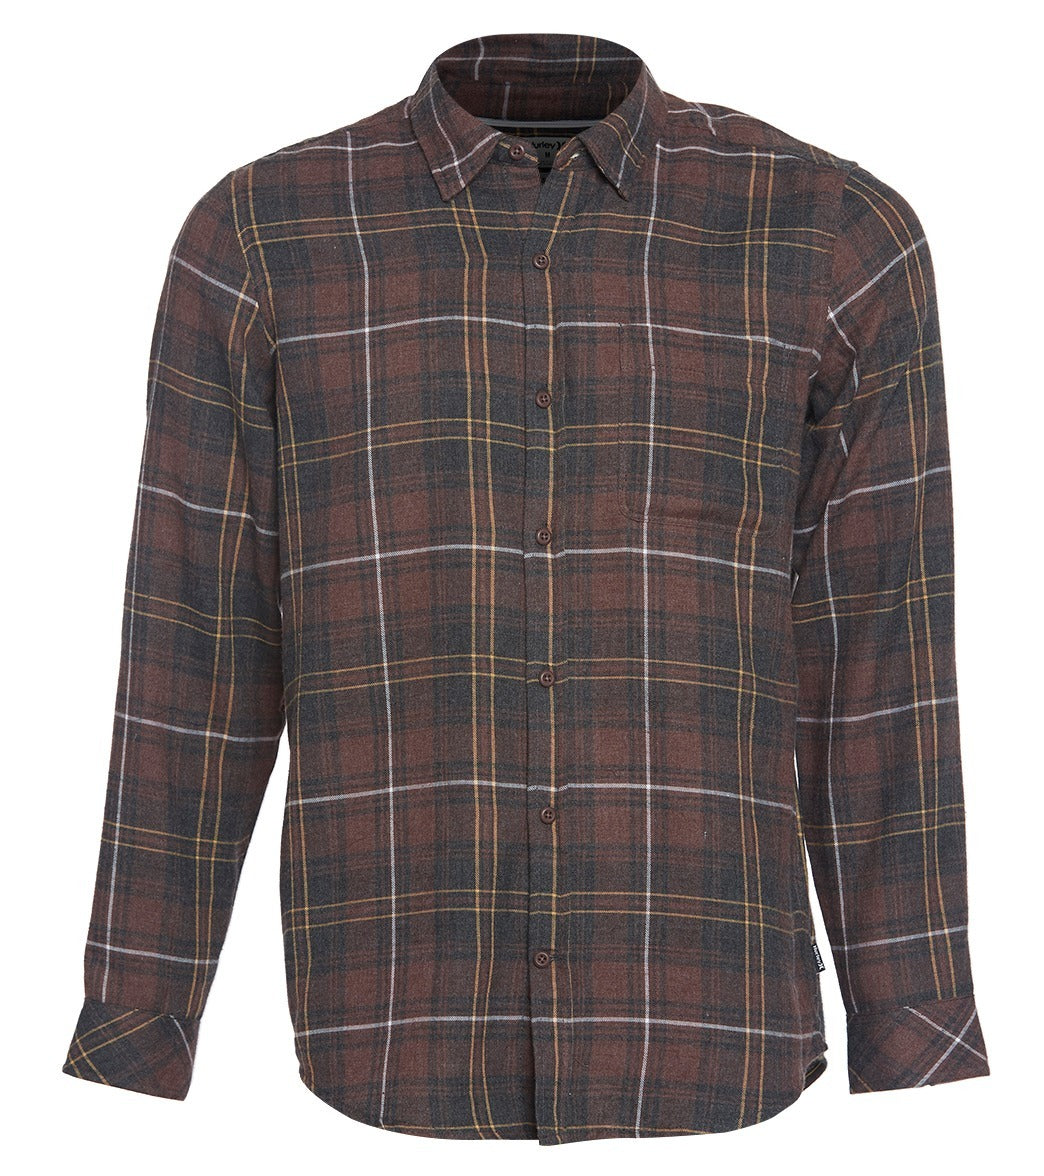 Hurley Vedder Washed Long Sleeve Flannel Shirt - El Dorado Small Cotton/Polyester - Swimoutlet.com